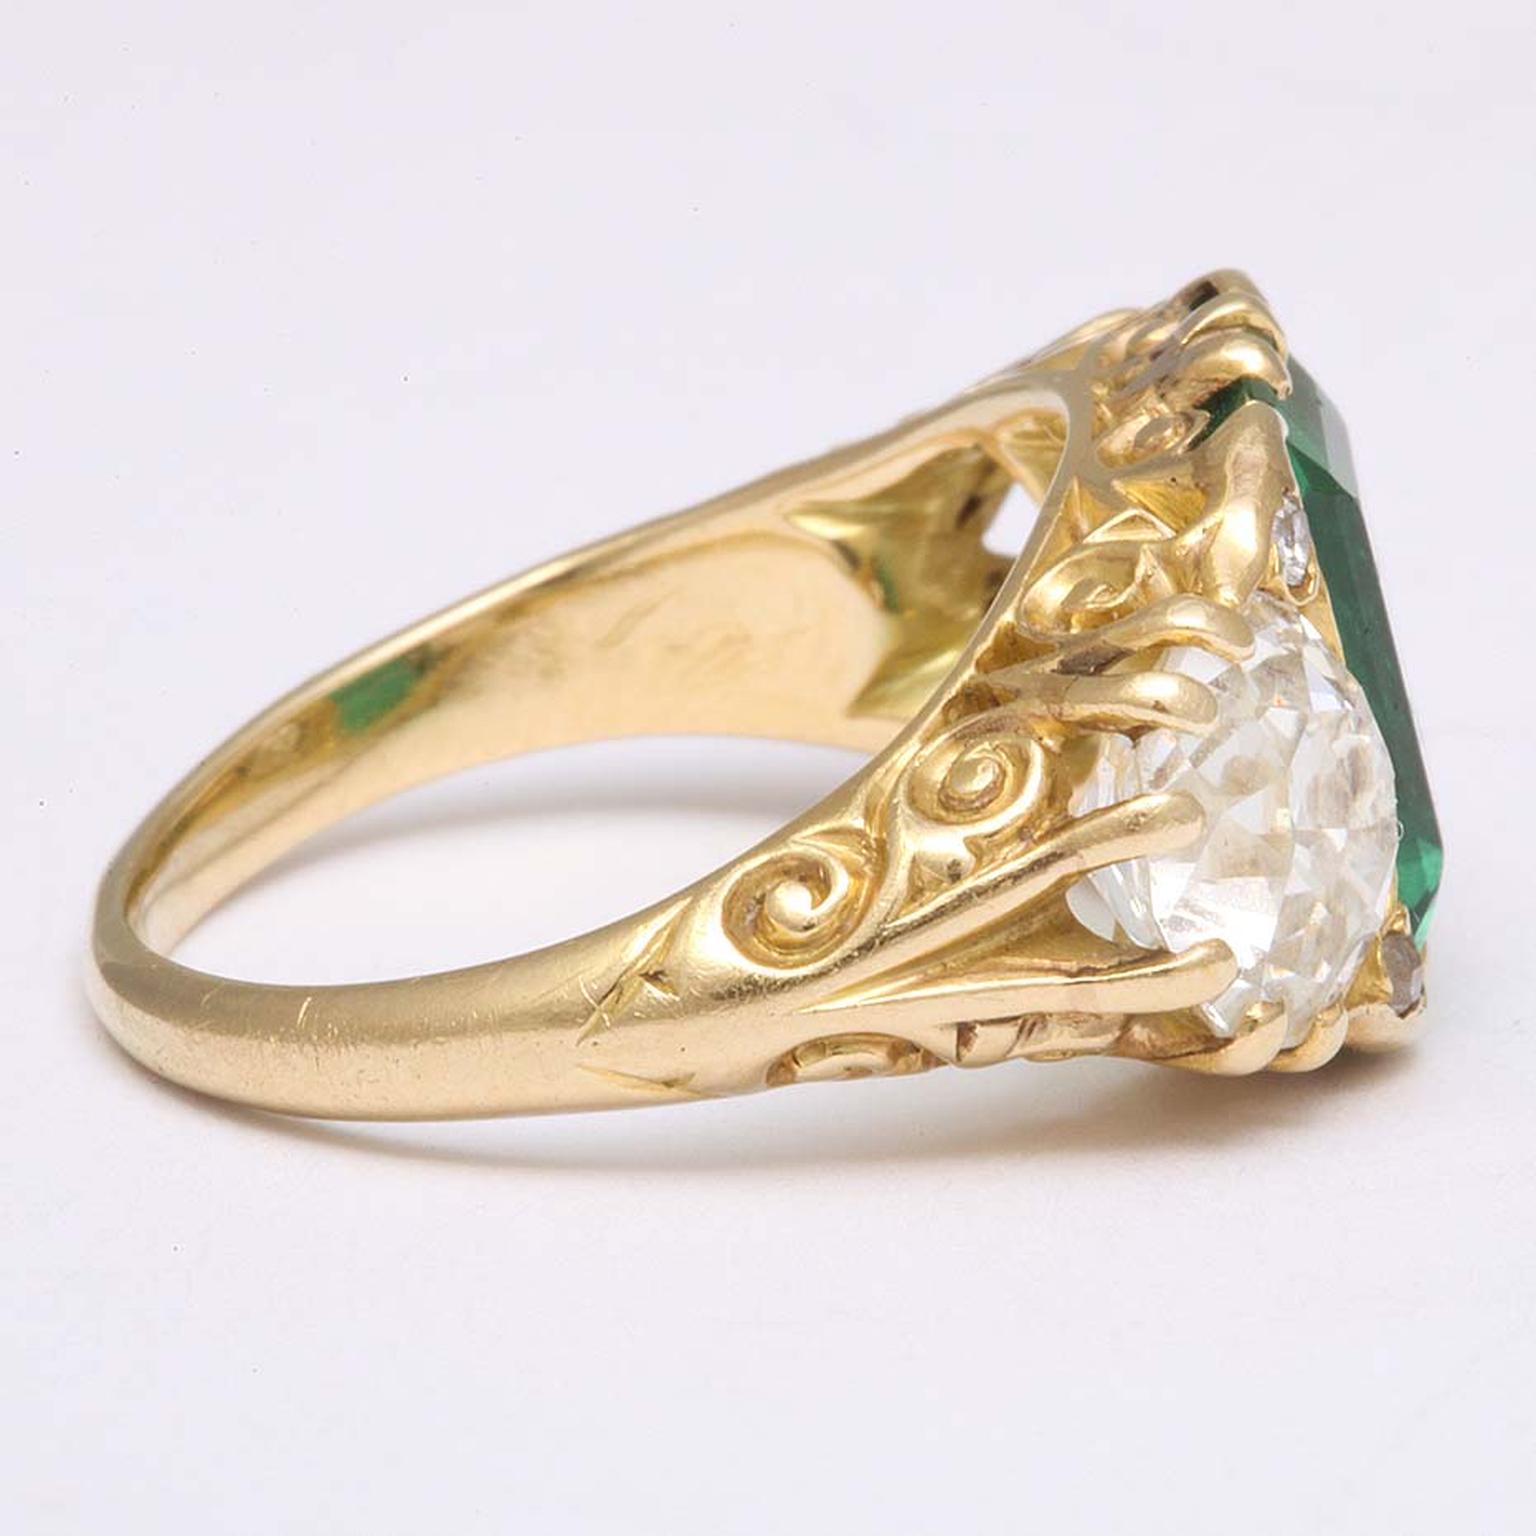 A side view of A La Vieille Russie's Victorian engagement ring in gold, which dates from around 1890.